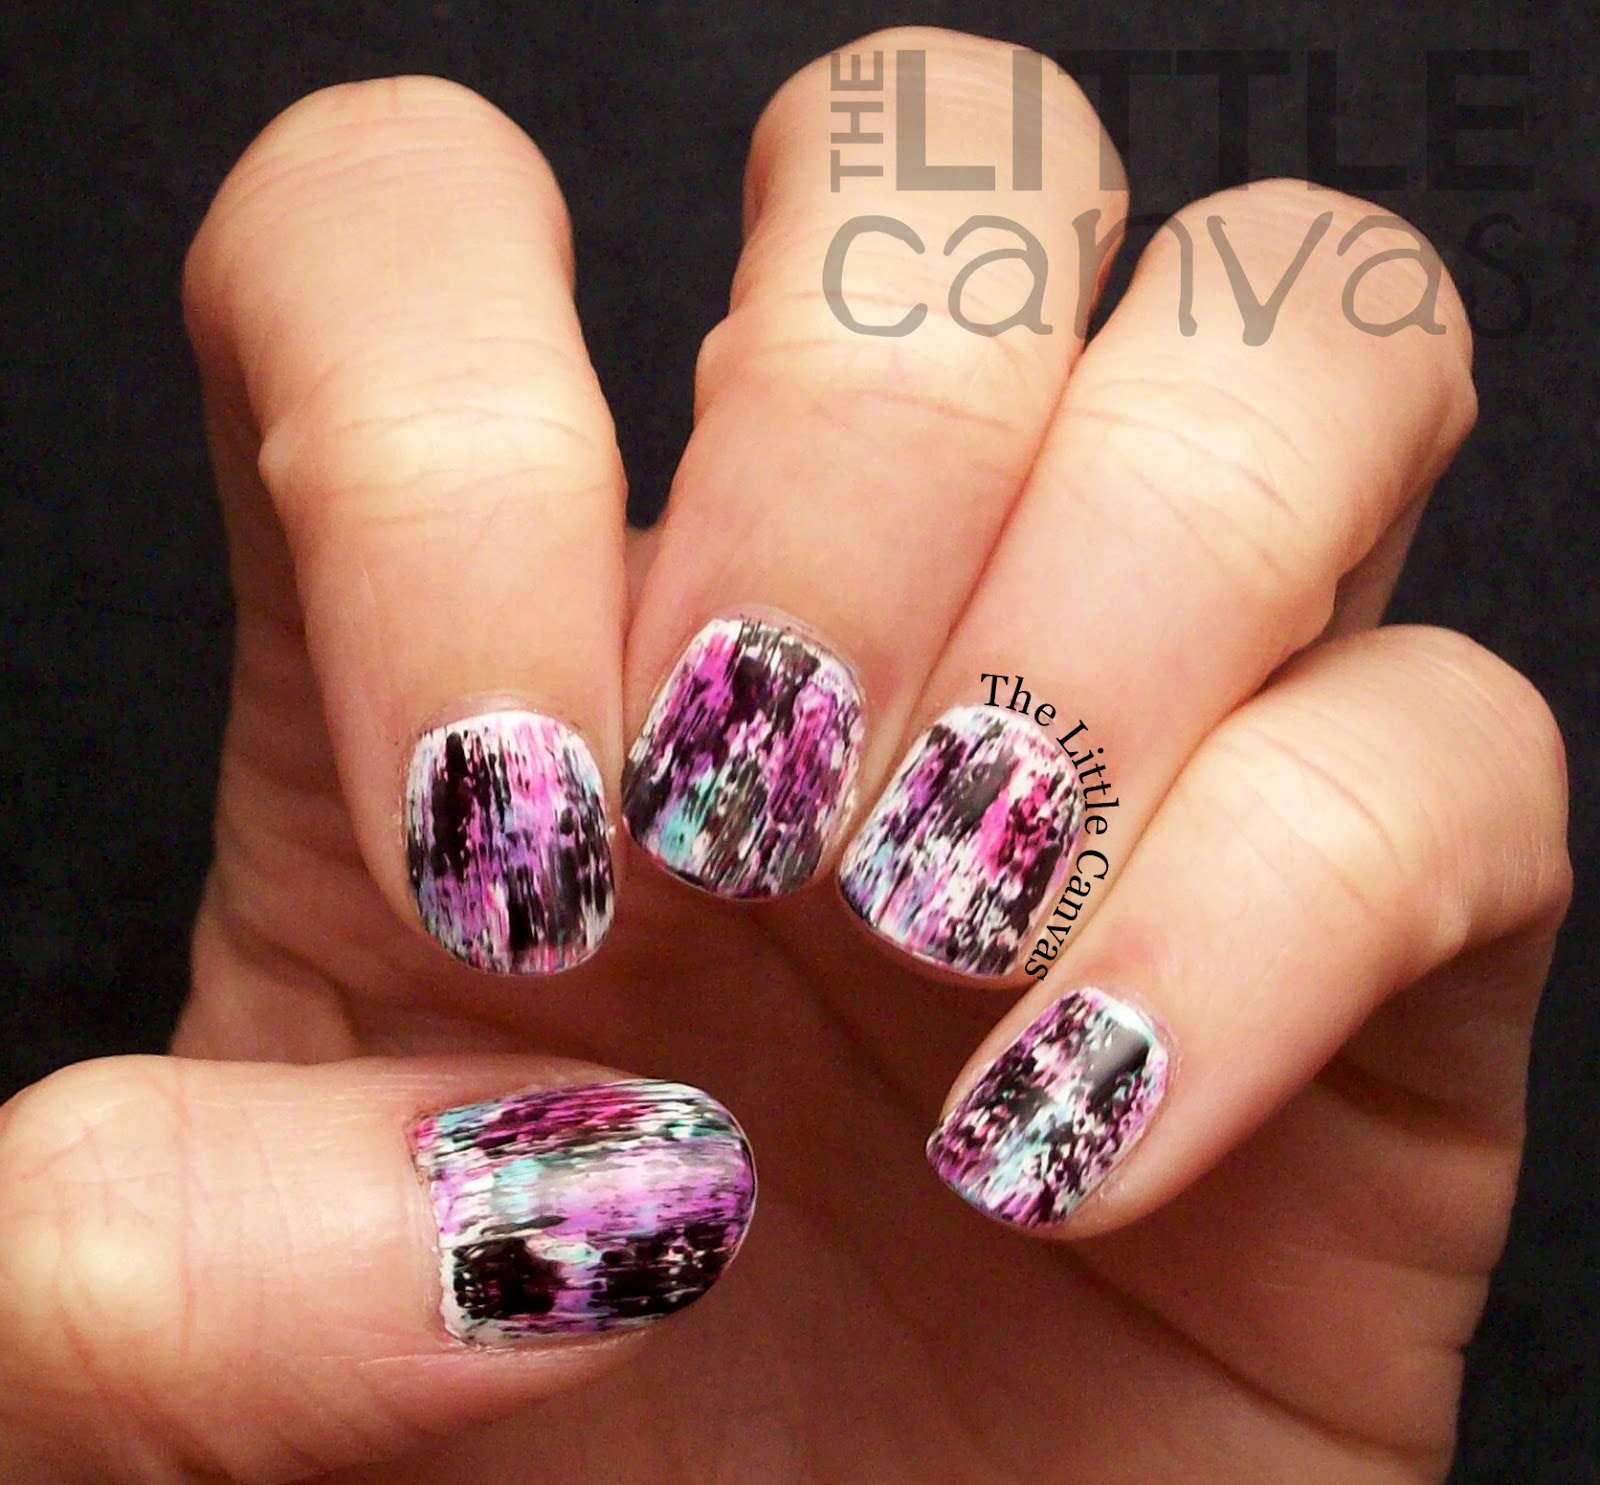 Chalkboard Nails Grunge Look - The Little Canvas